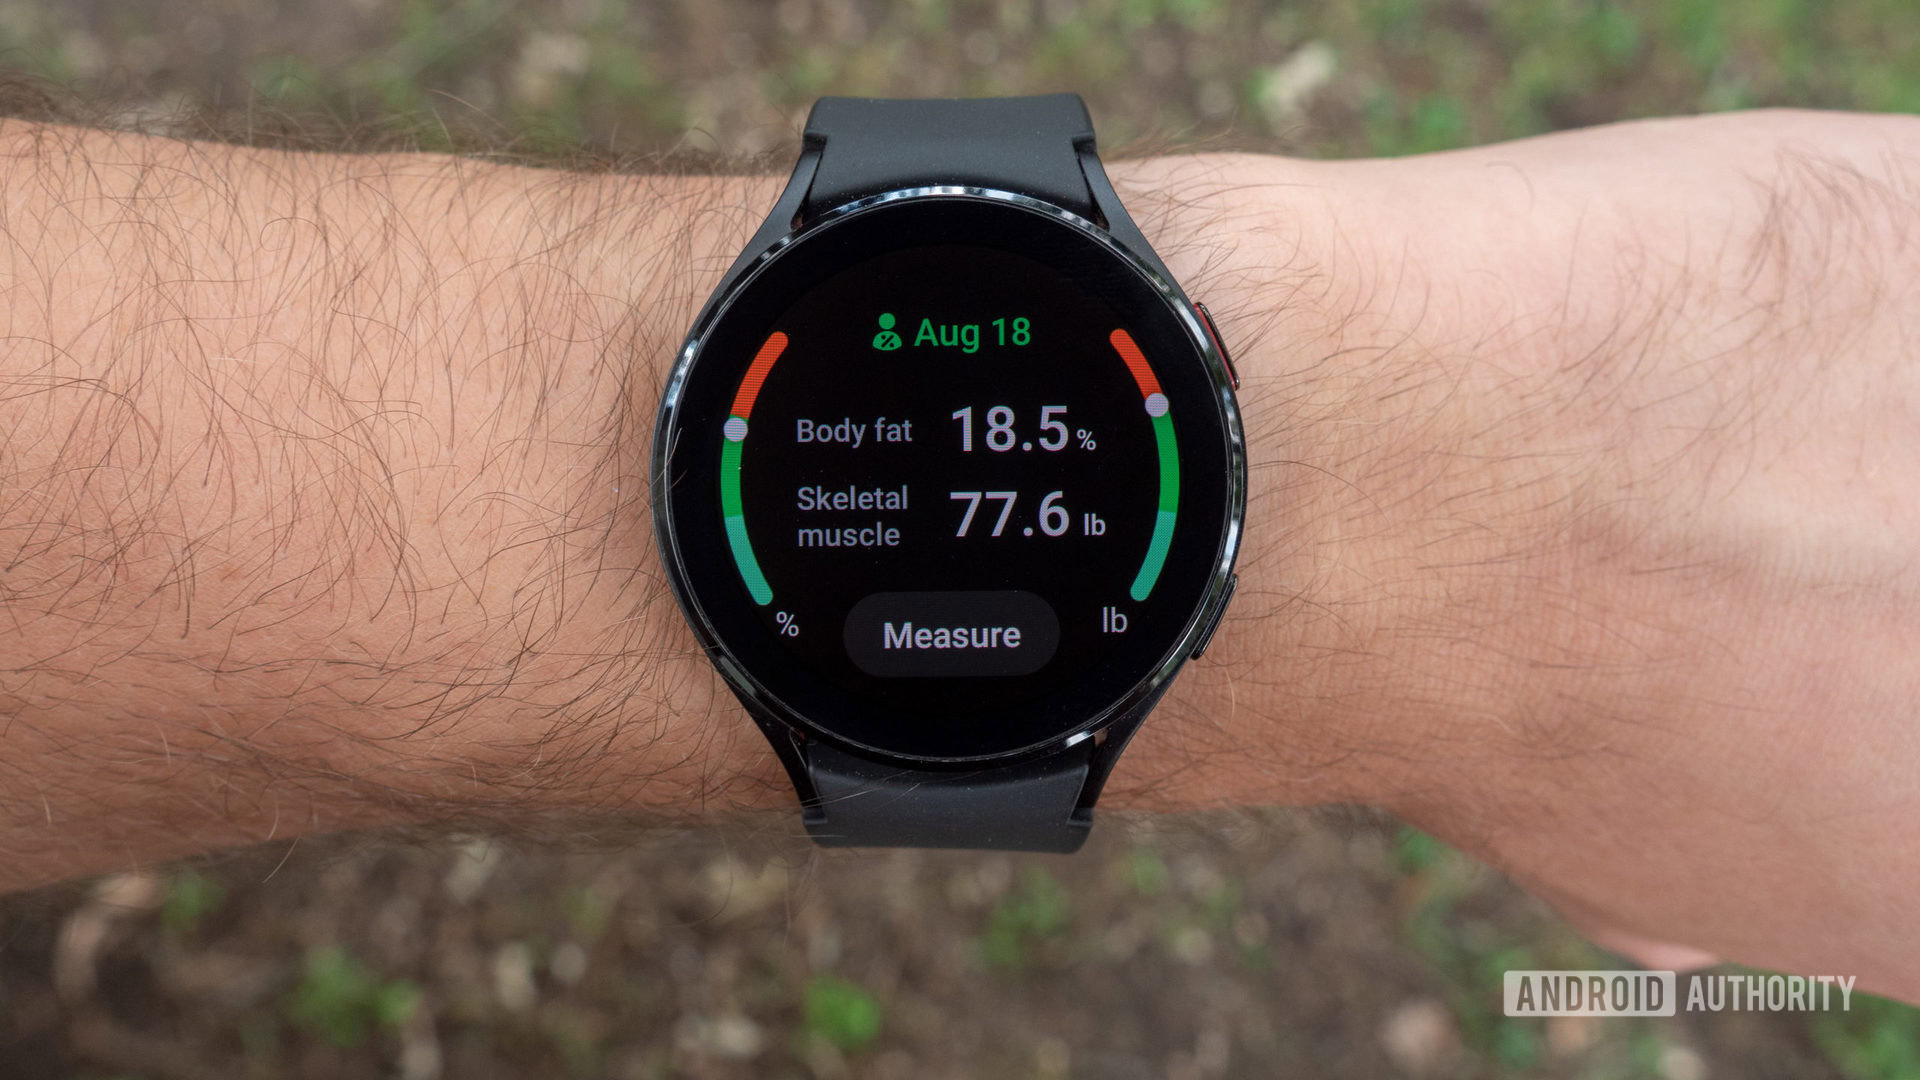 The Samsung Galaxy Watch 4 on a wrist showing body composition analysis.